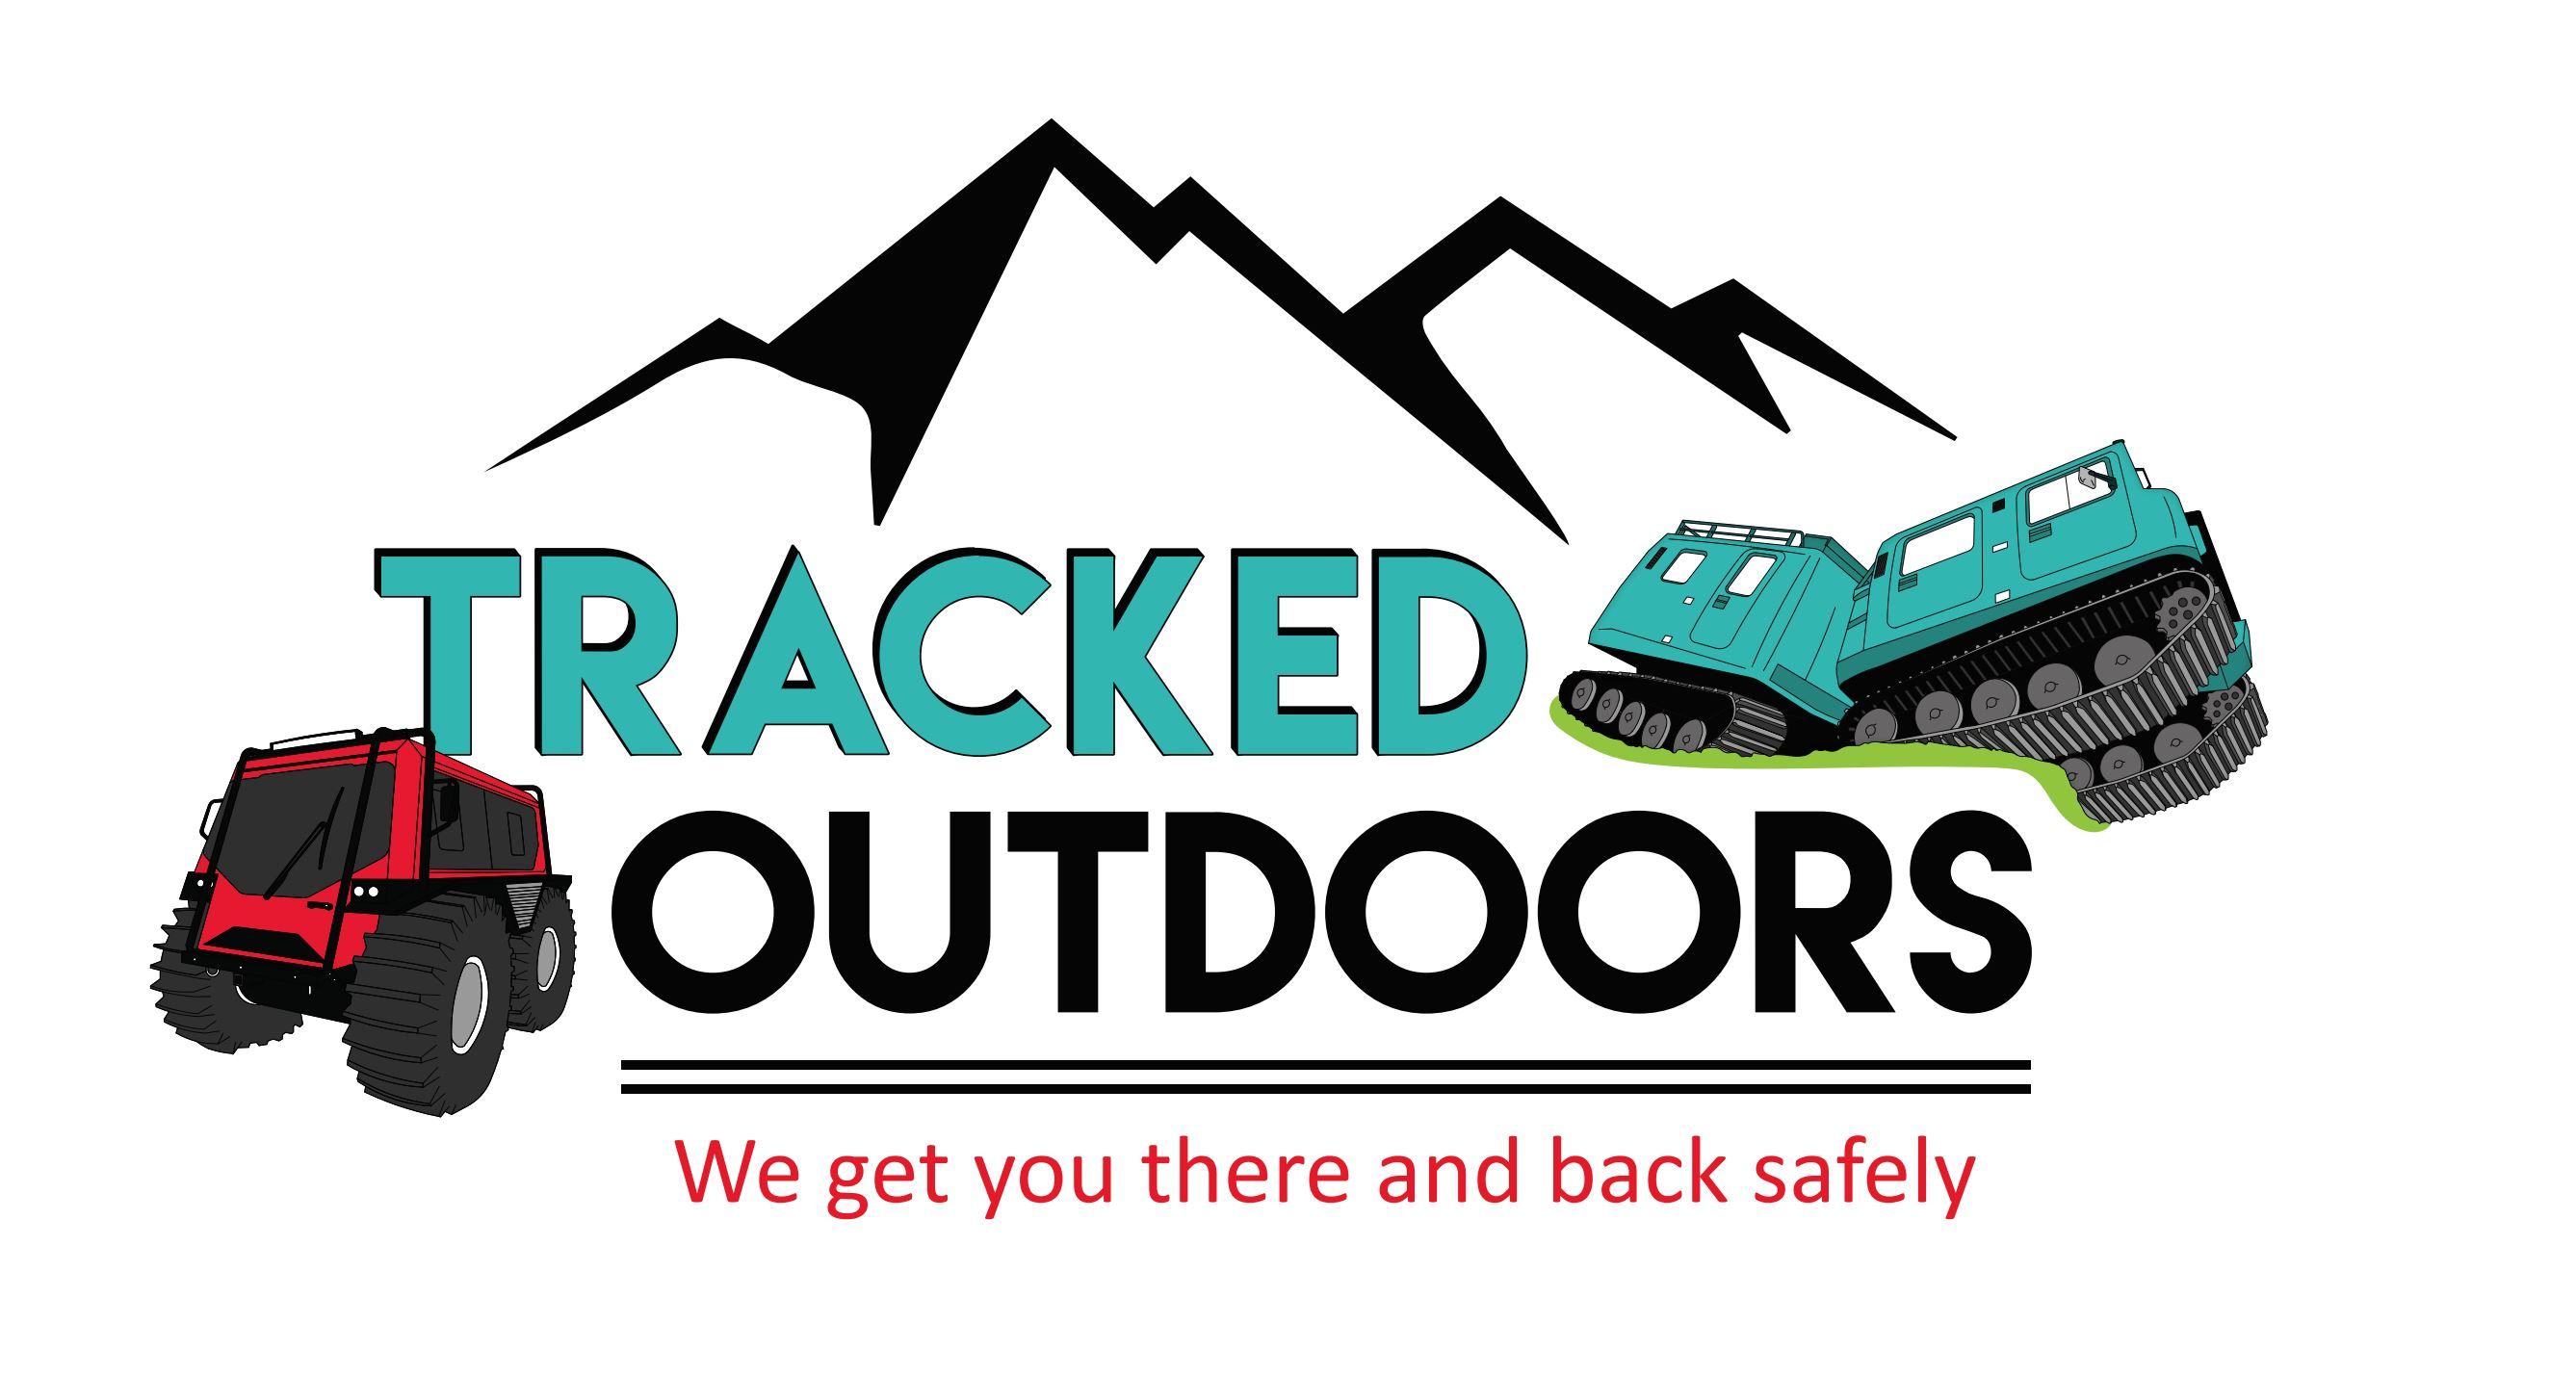 Tracked Outdoors, LLC